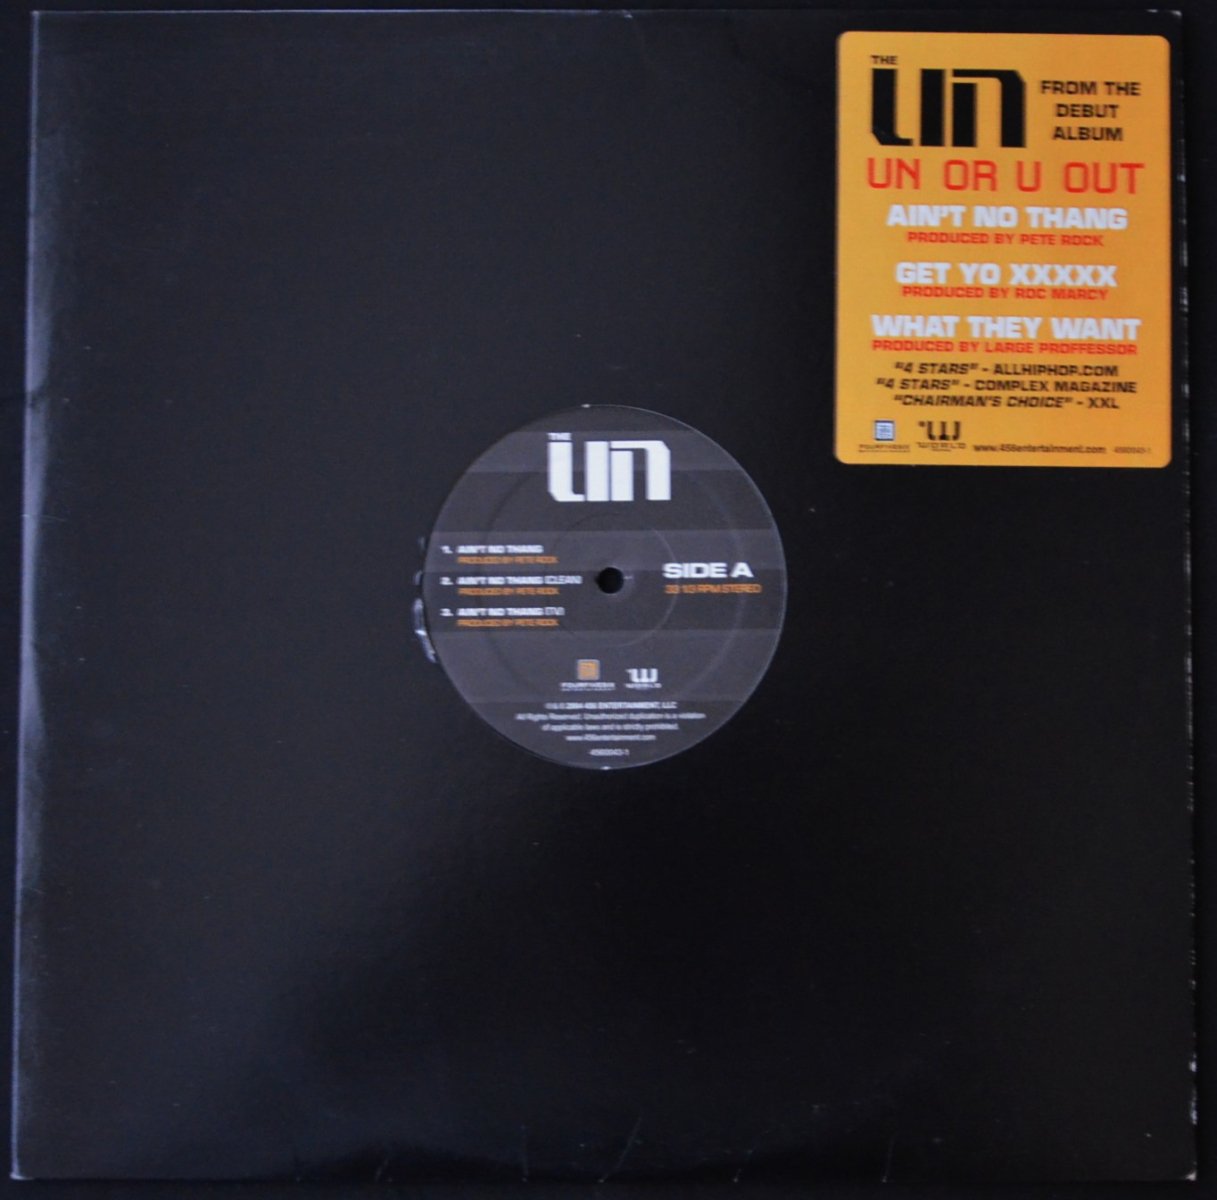 THE UN / AIN'T NO THANG (PRO PETE ROCK)  / WHAT THEY WANT (PRO LARGE PRO) (12